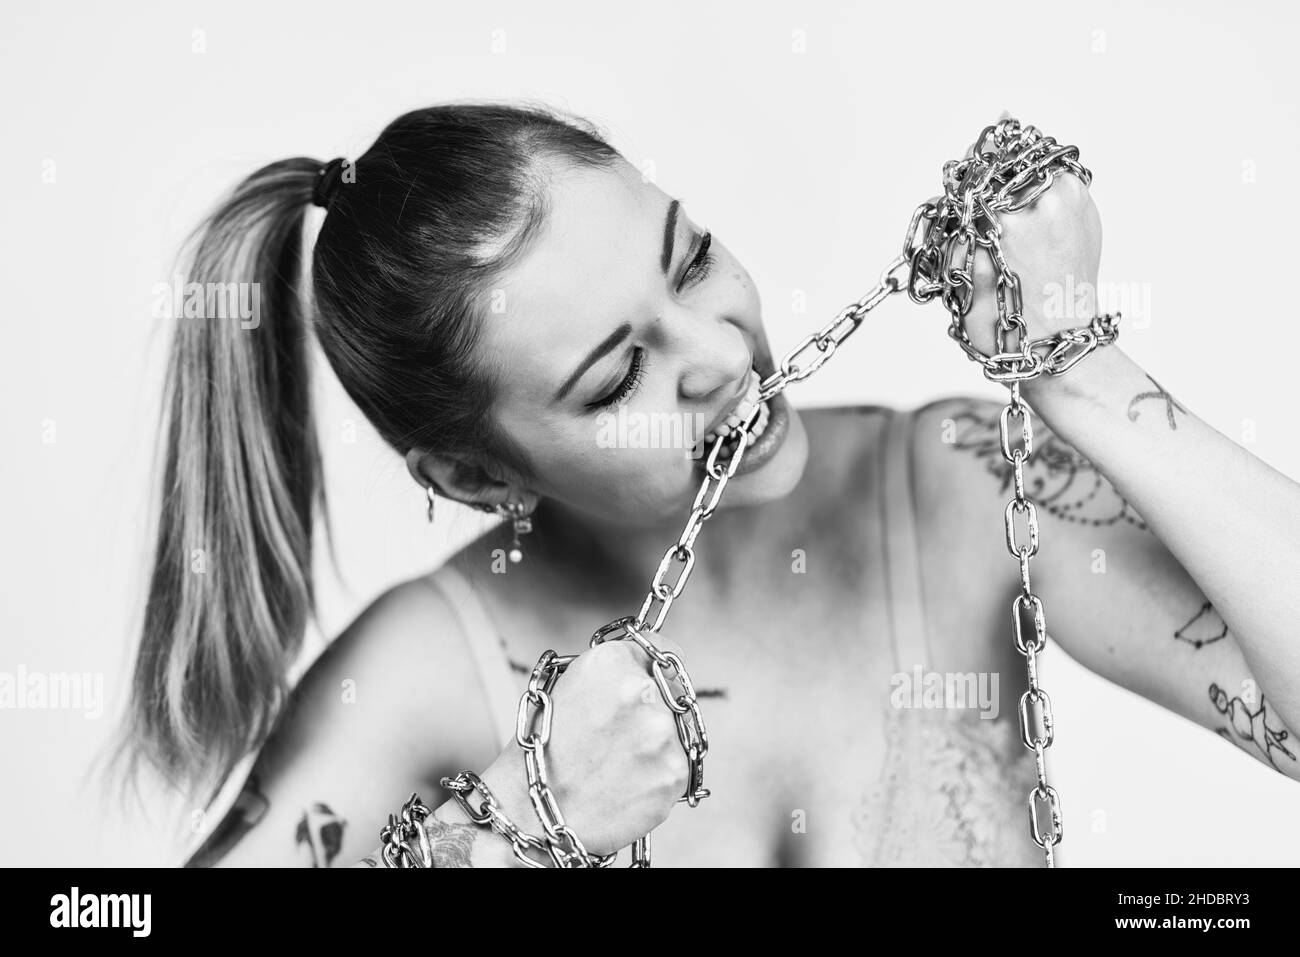 Tattooed feminist woman in bra biting and tearing a iron chain on white background. Girl power concept. Black and white photo Stock Photo